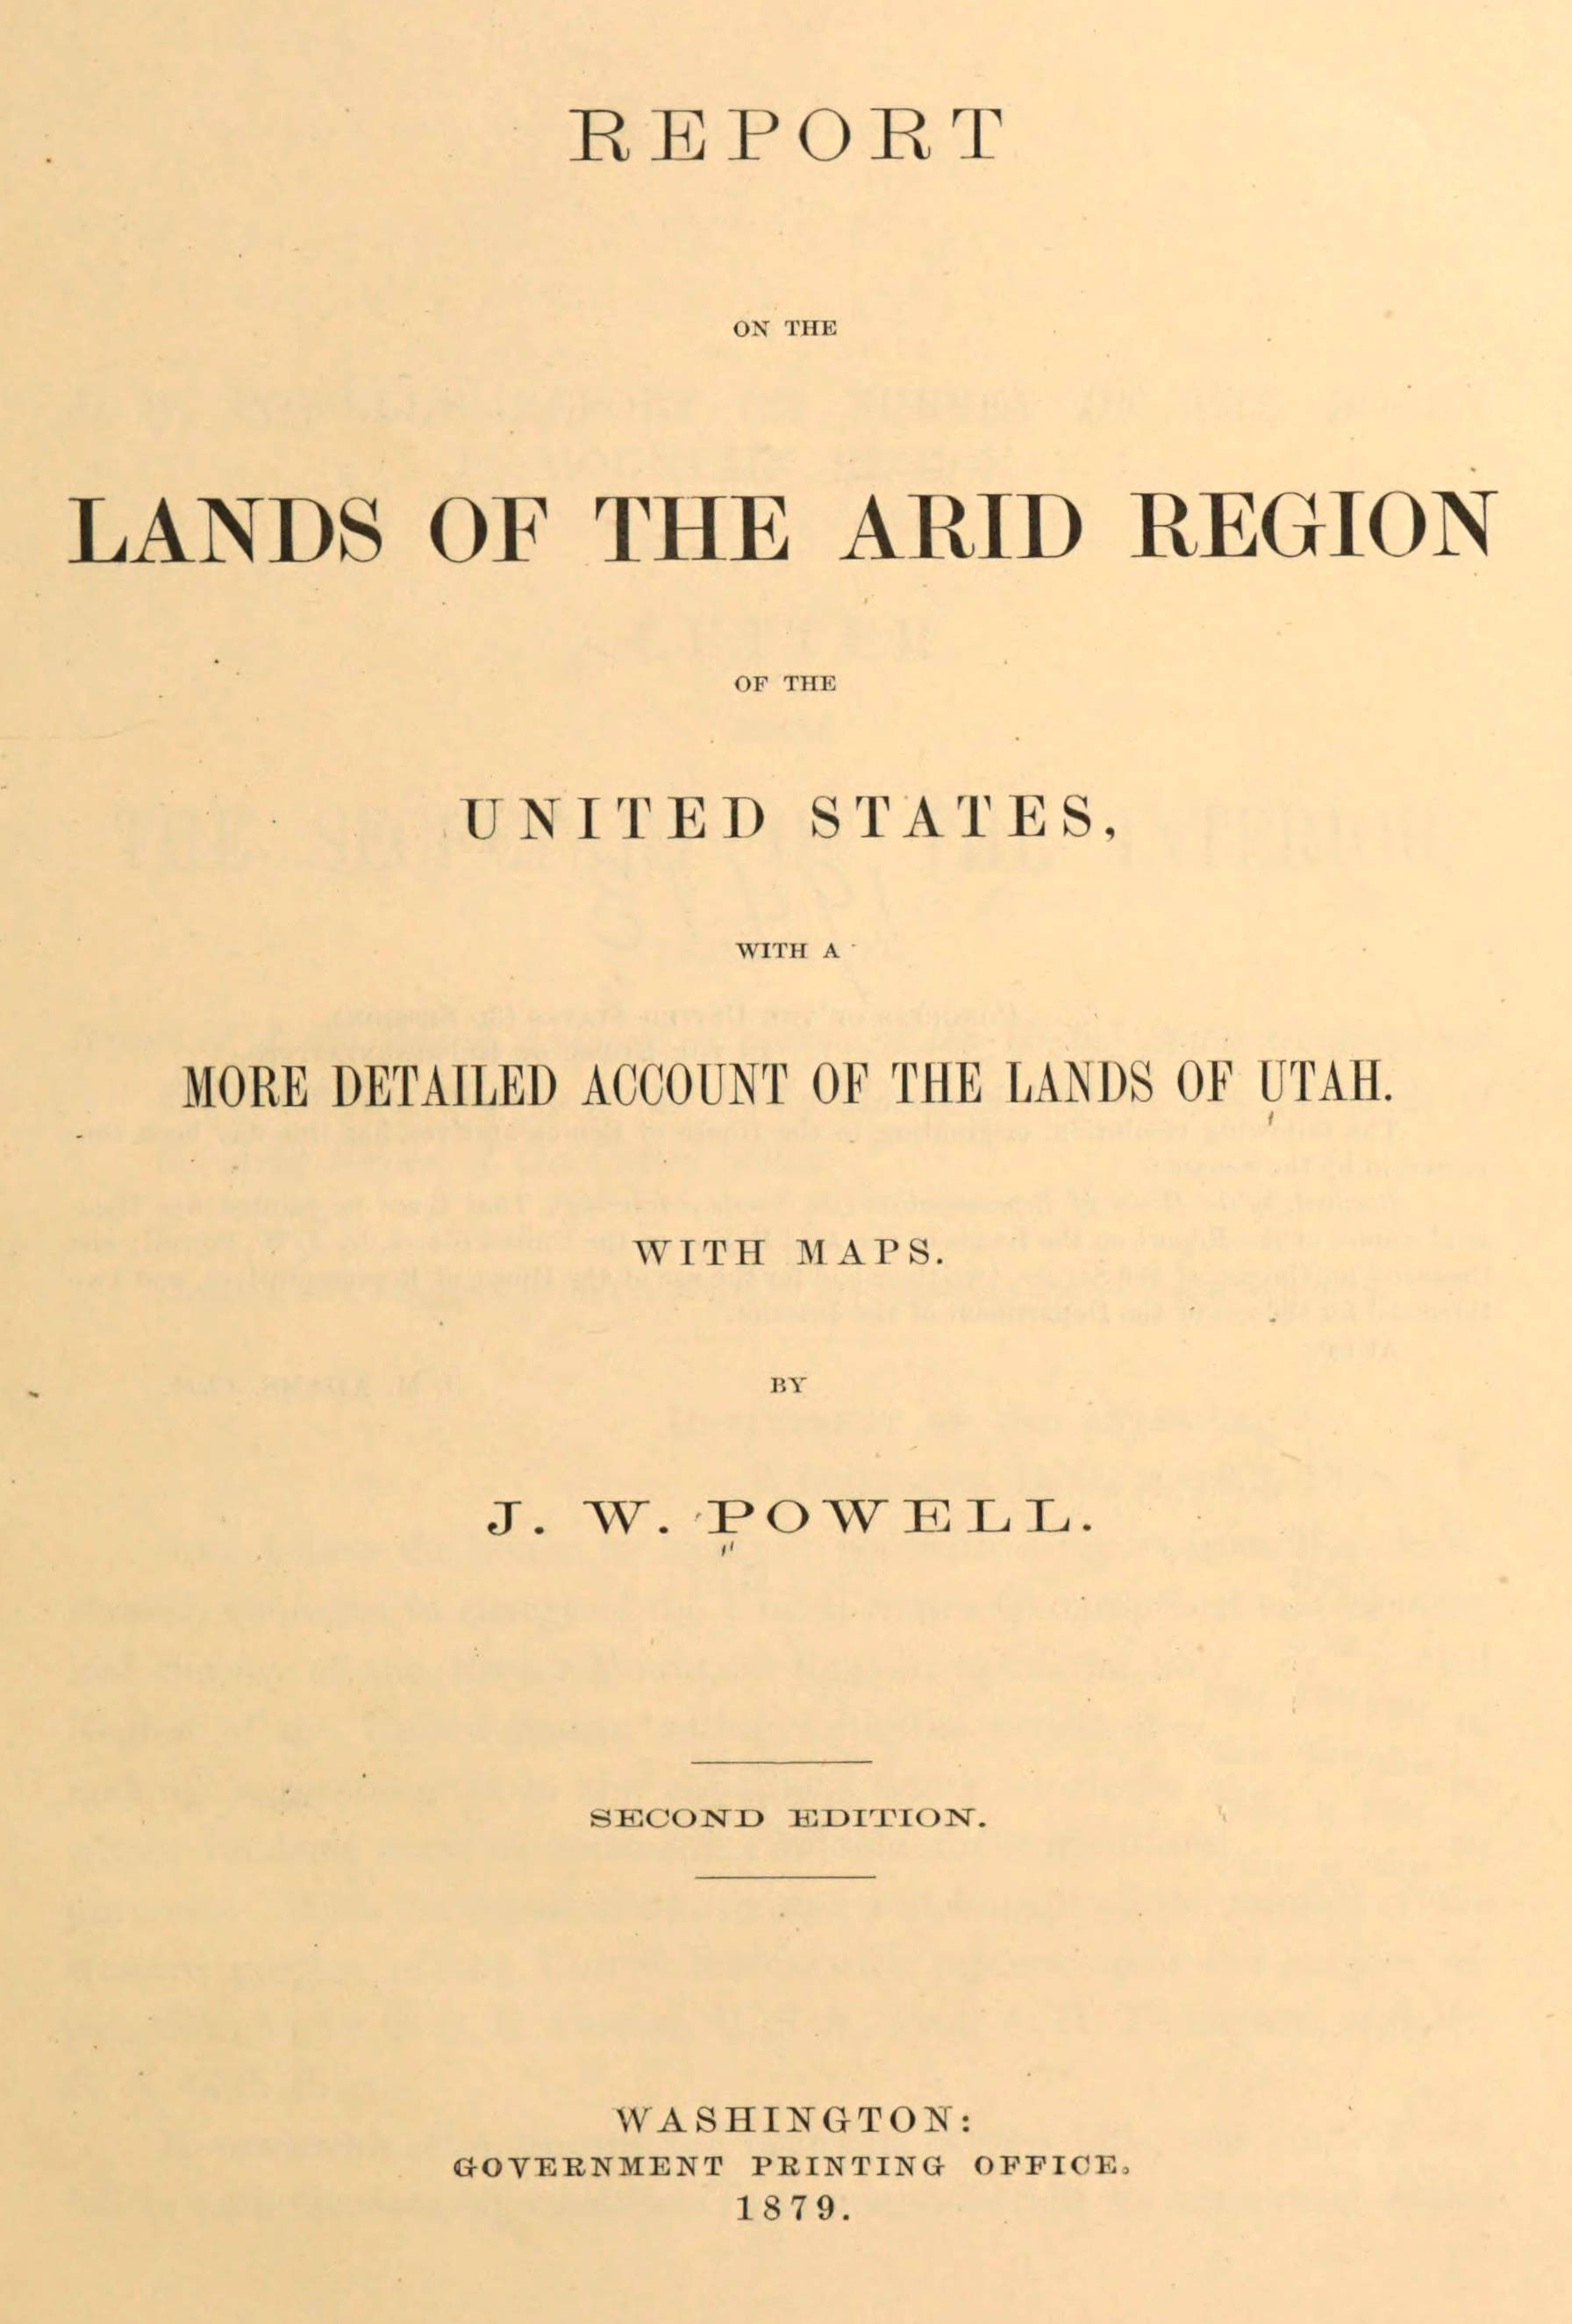 Report on the lands of the arid region of the United States, with a more detailed account of the lands of Utah